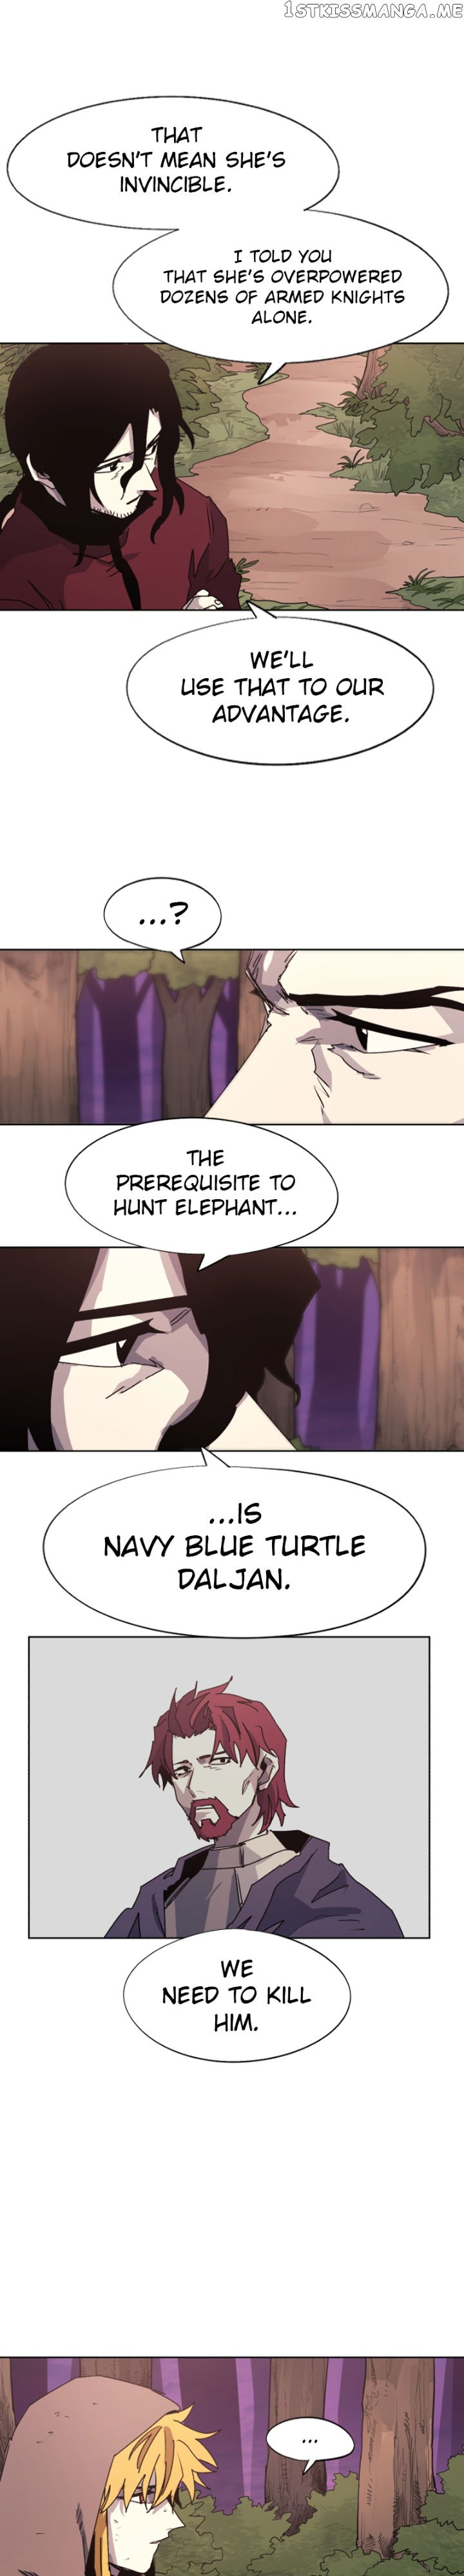 The Knight of Embers Chapter 112 page 12